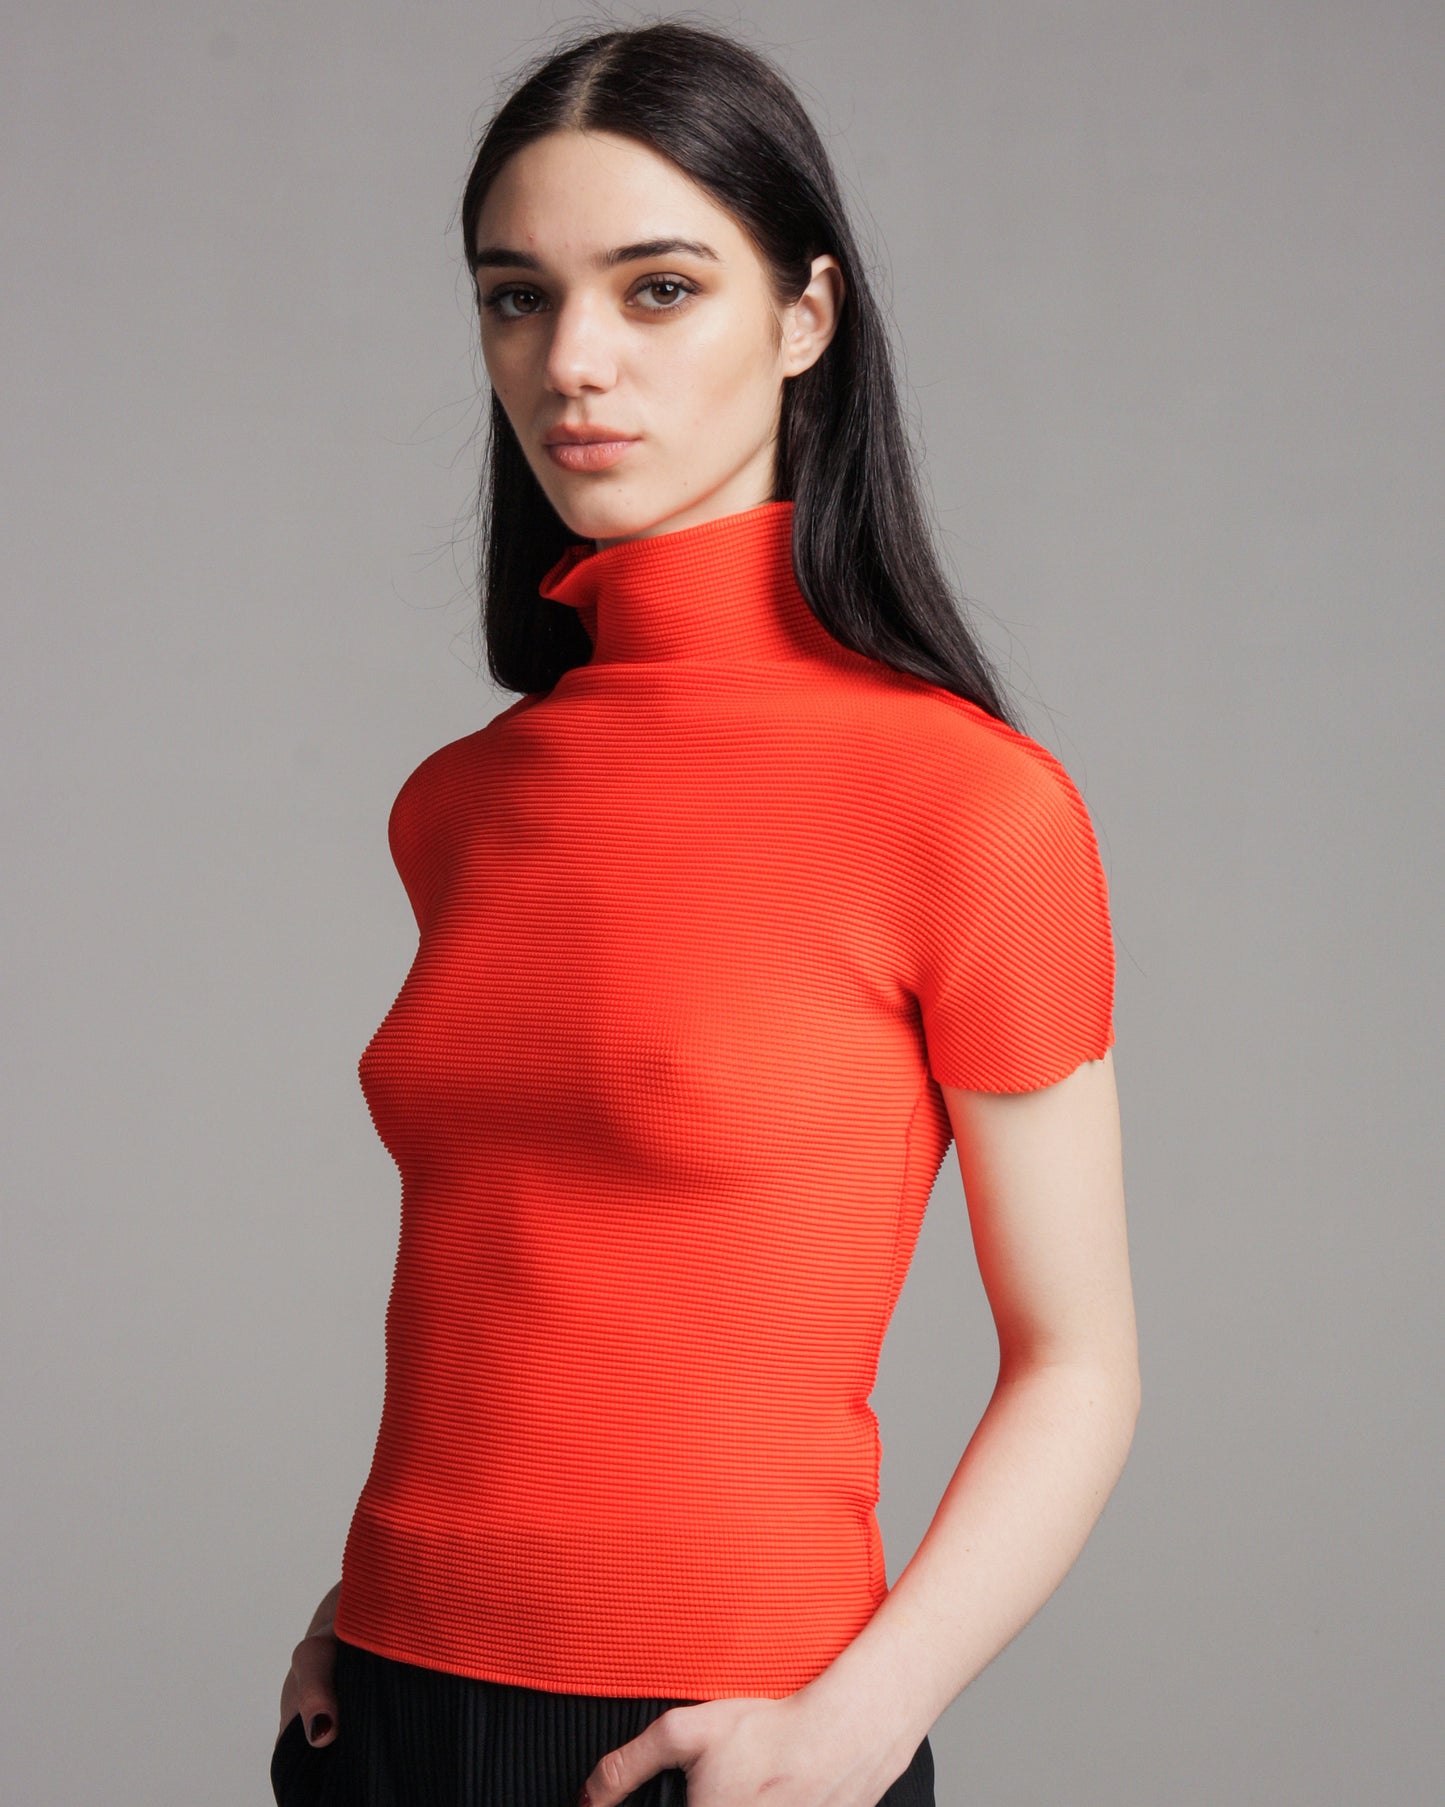 Neon Red Micropleat Tee